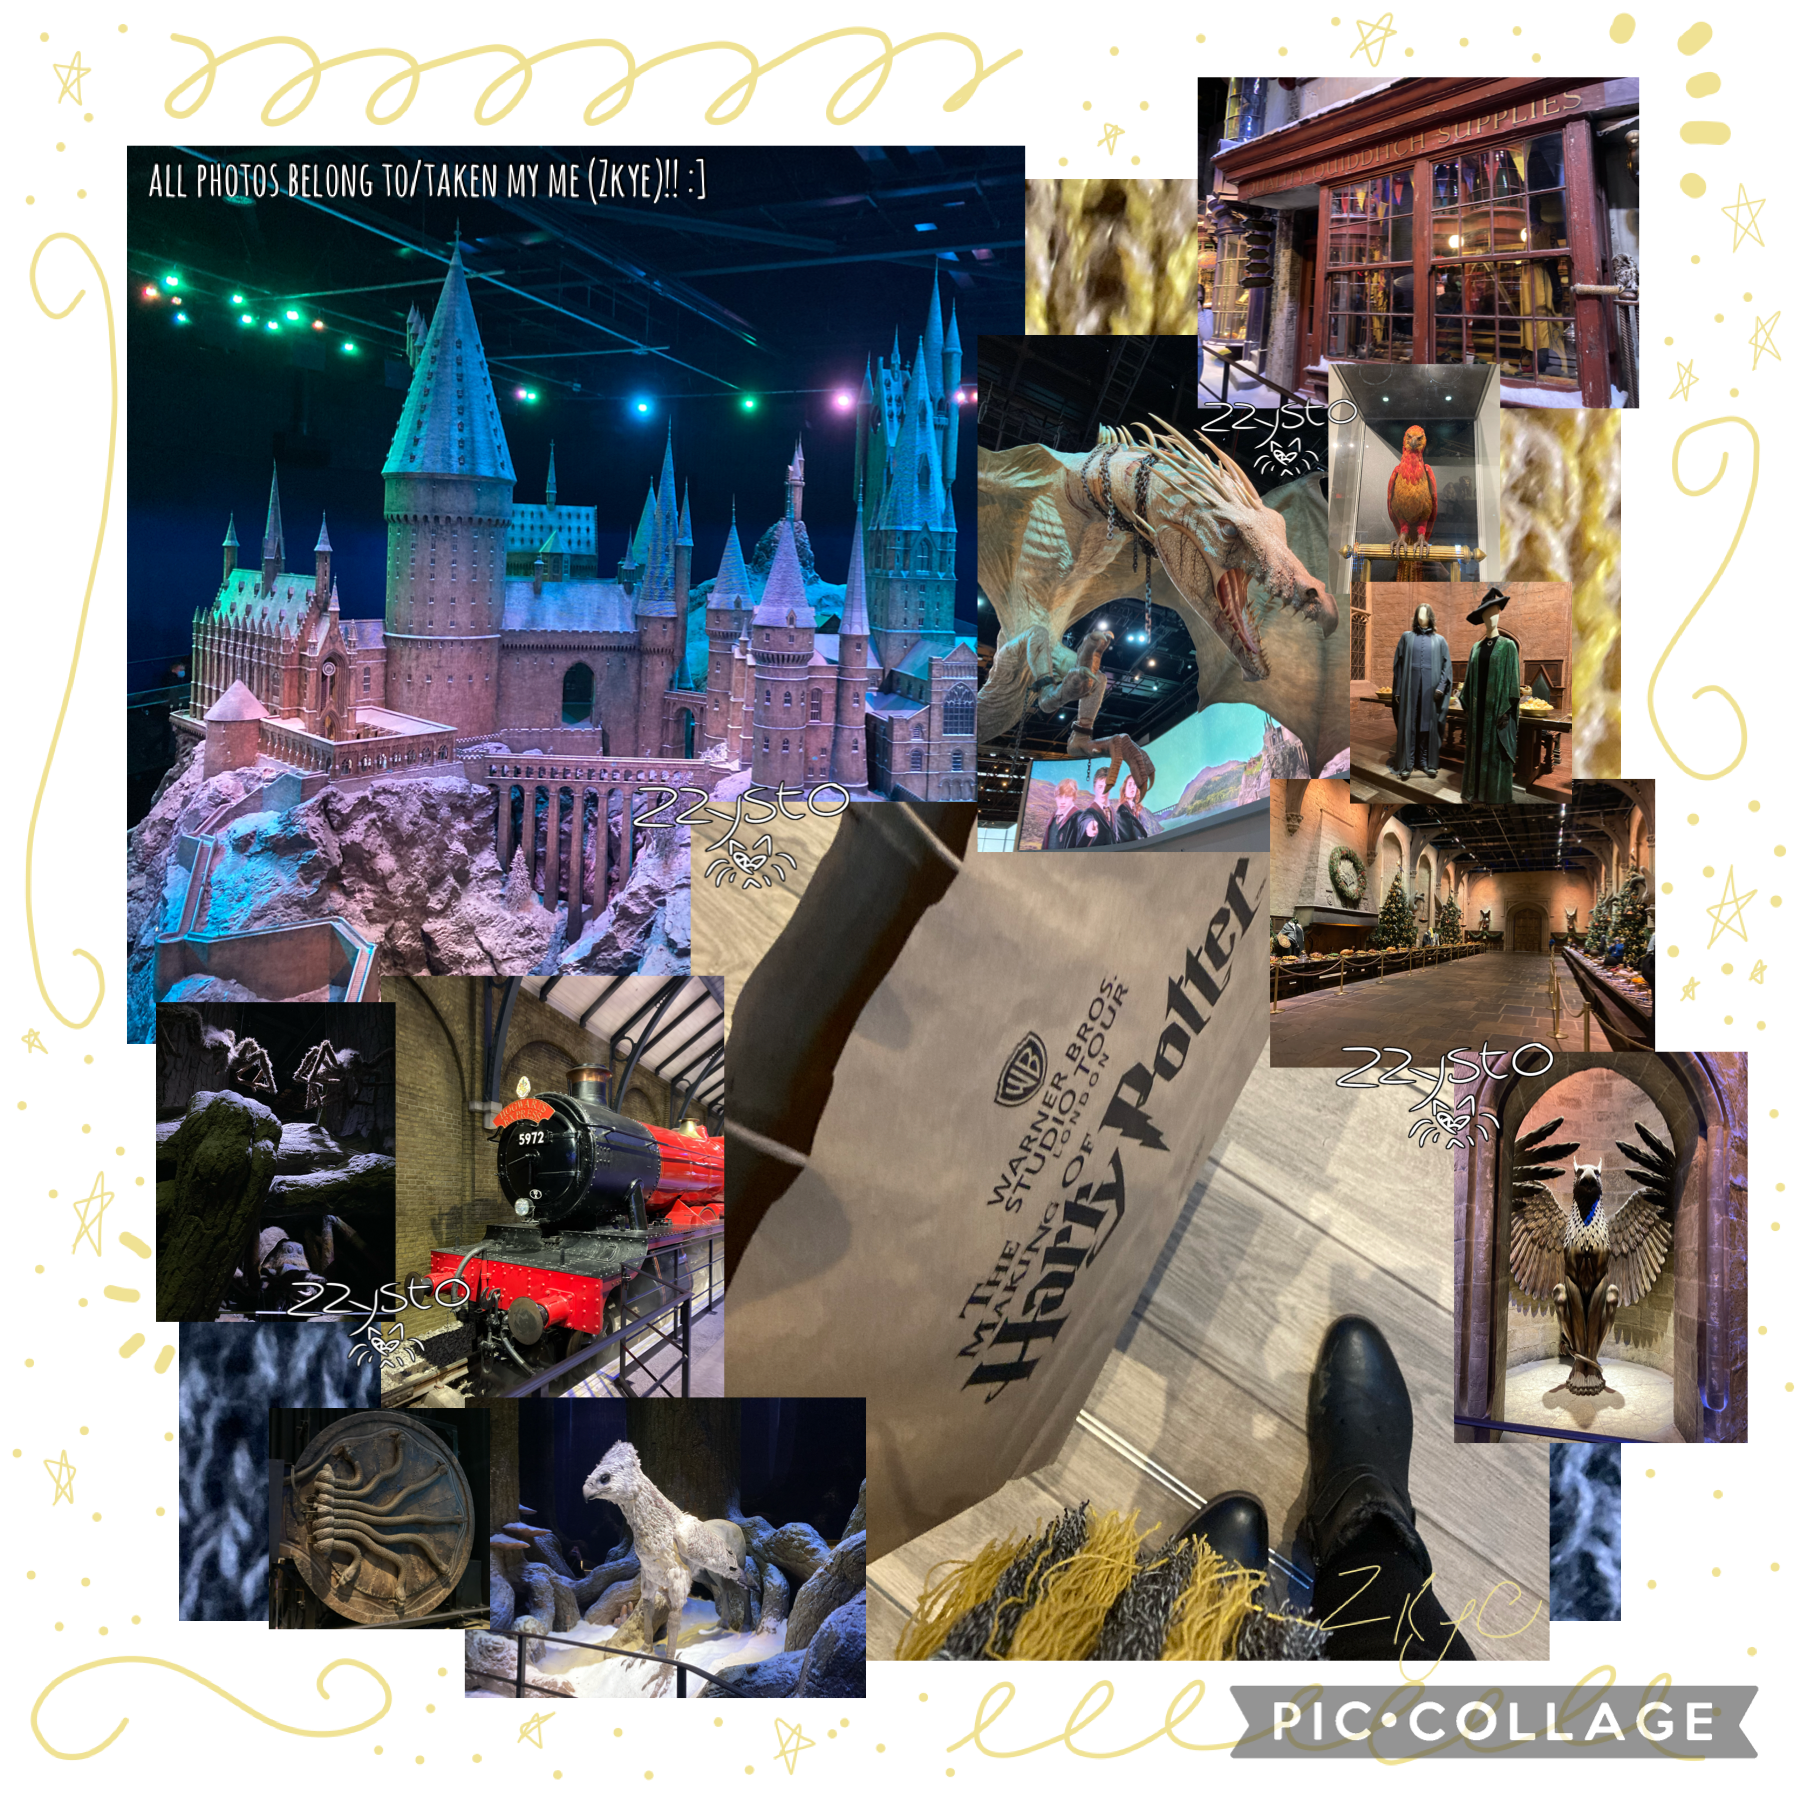 💛TAP💛
is it clear I’m not a collager lmaò all I do is draw my silly little characters-
ANYWAY TODAY WAS SO FUN!!! my dad bought us tickets to the Harry Potter studio tour for christmas which were for today!! I took around 250 photos, so here’s some of my 